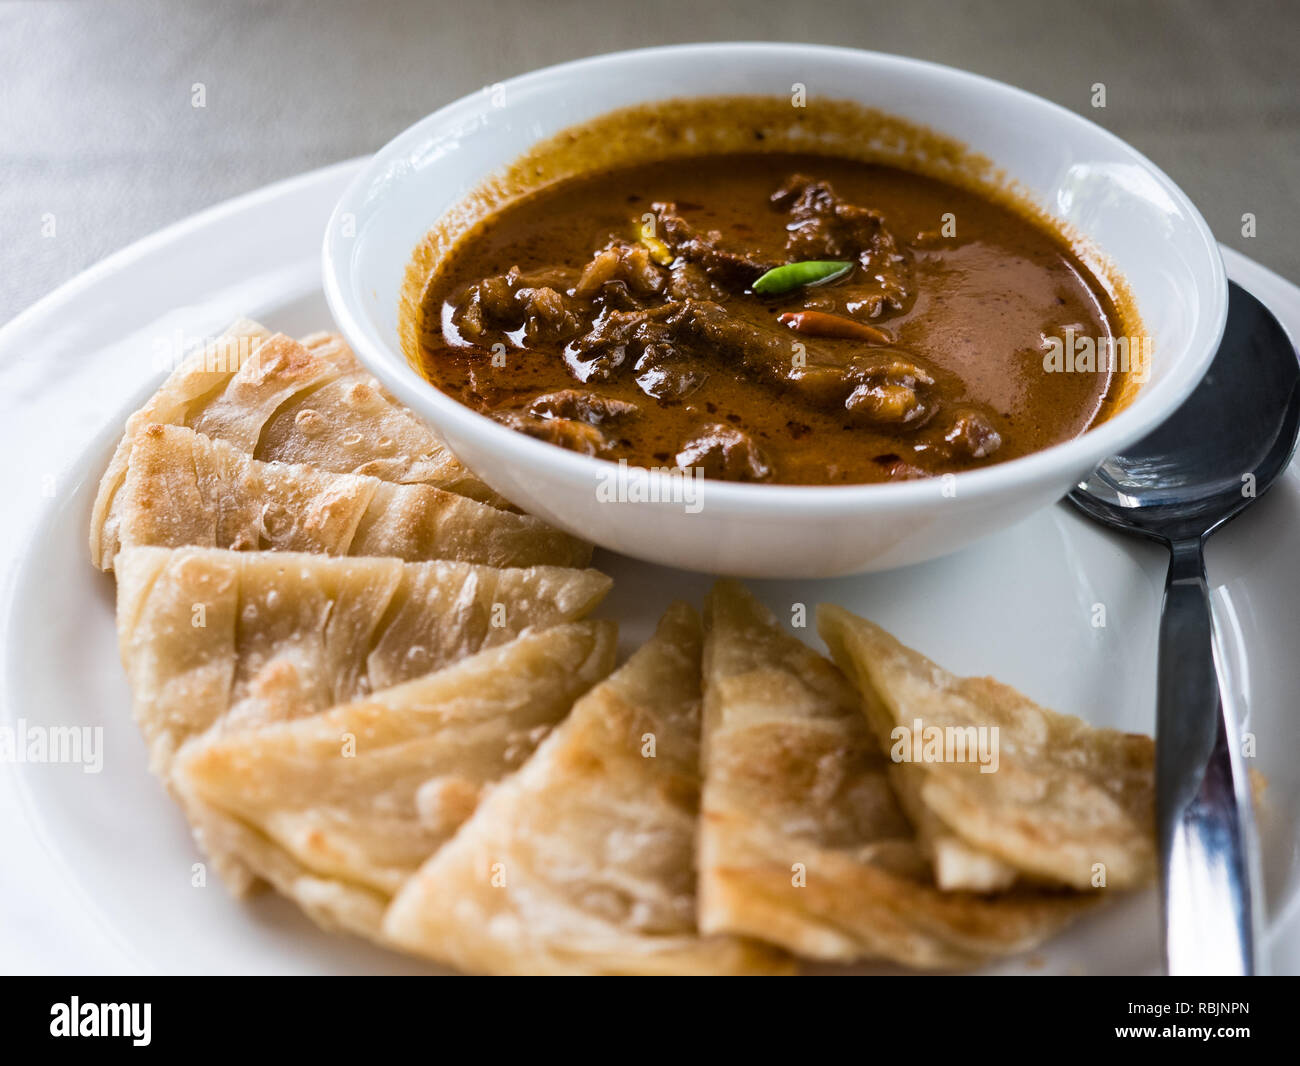 Roasted duck in red curry with roti Stock Photo